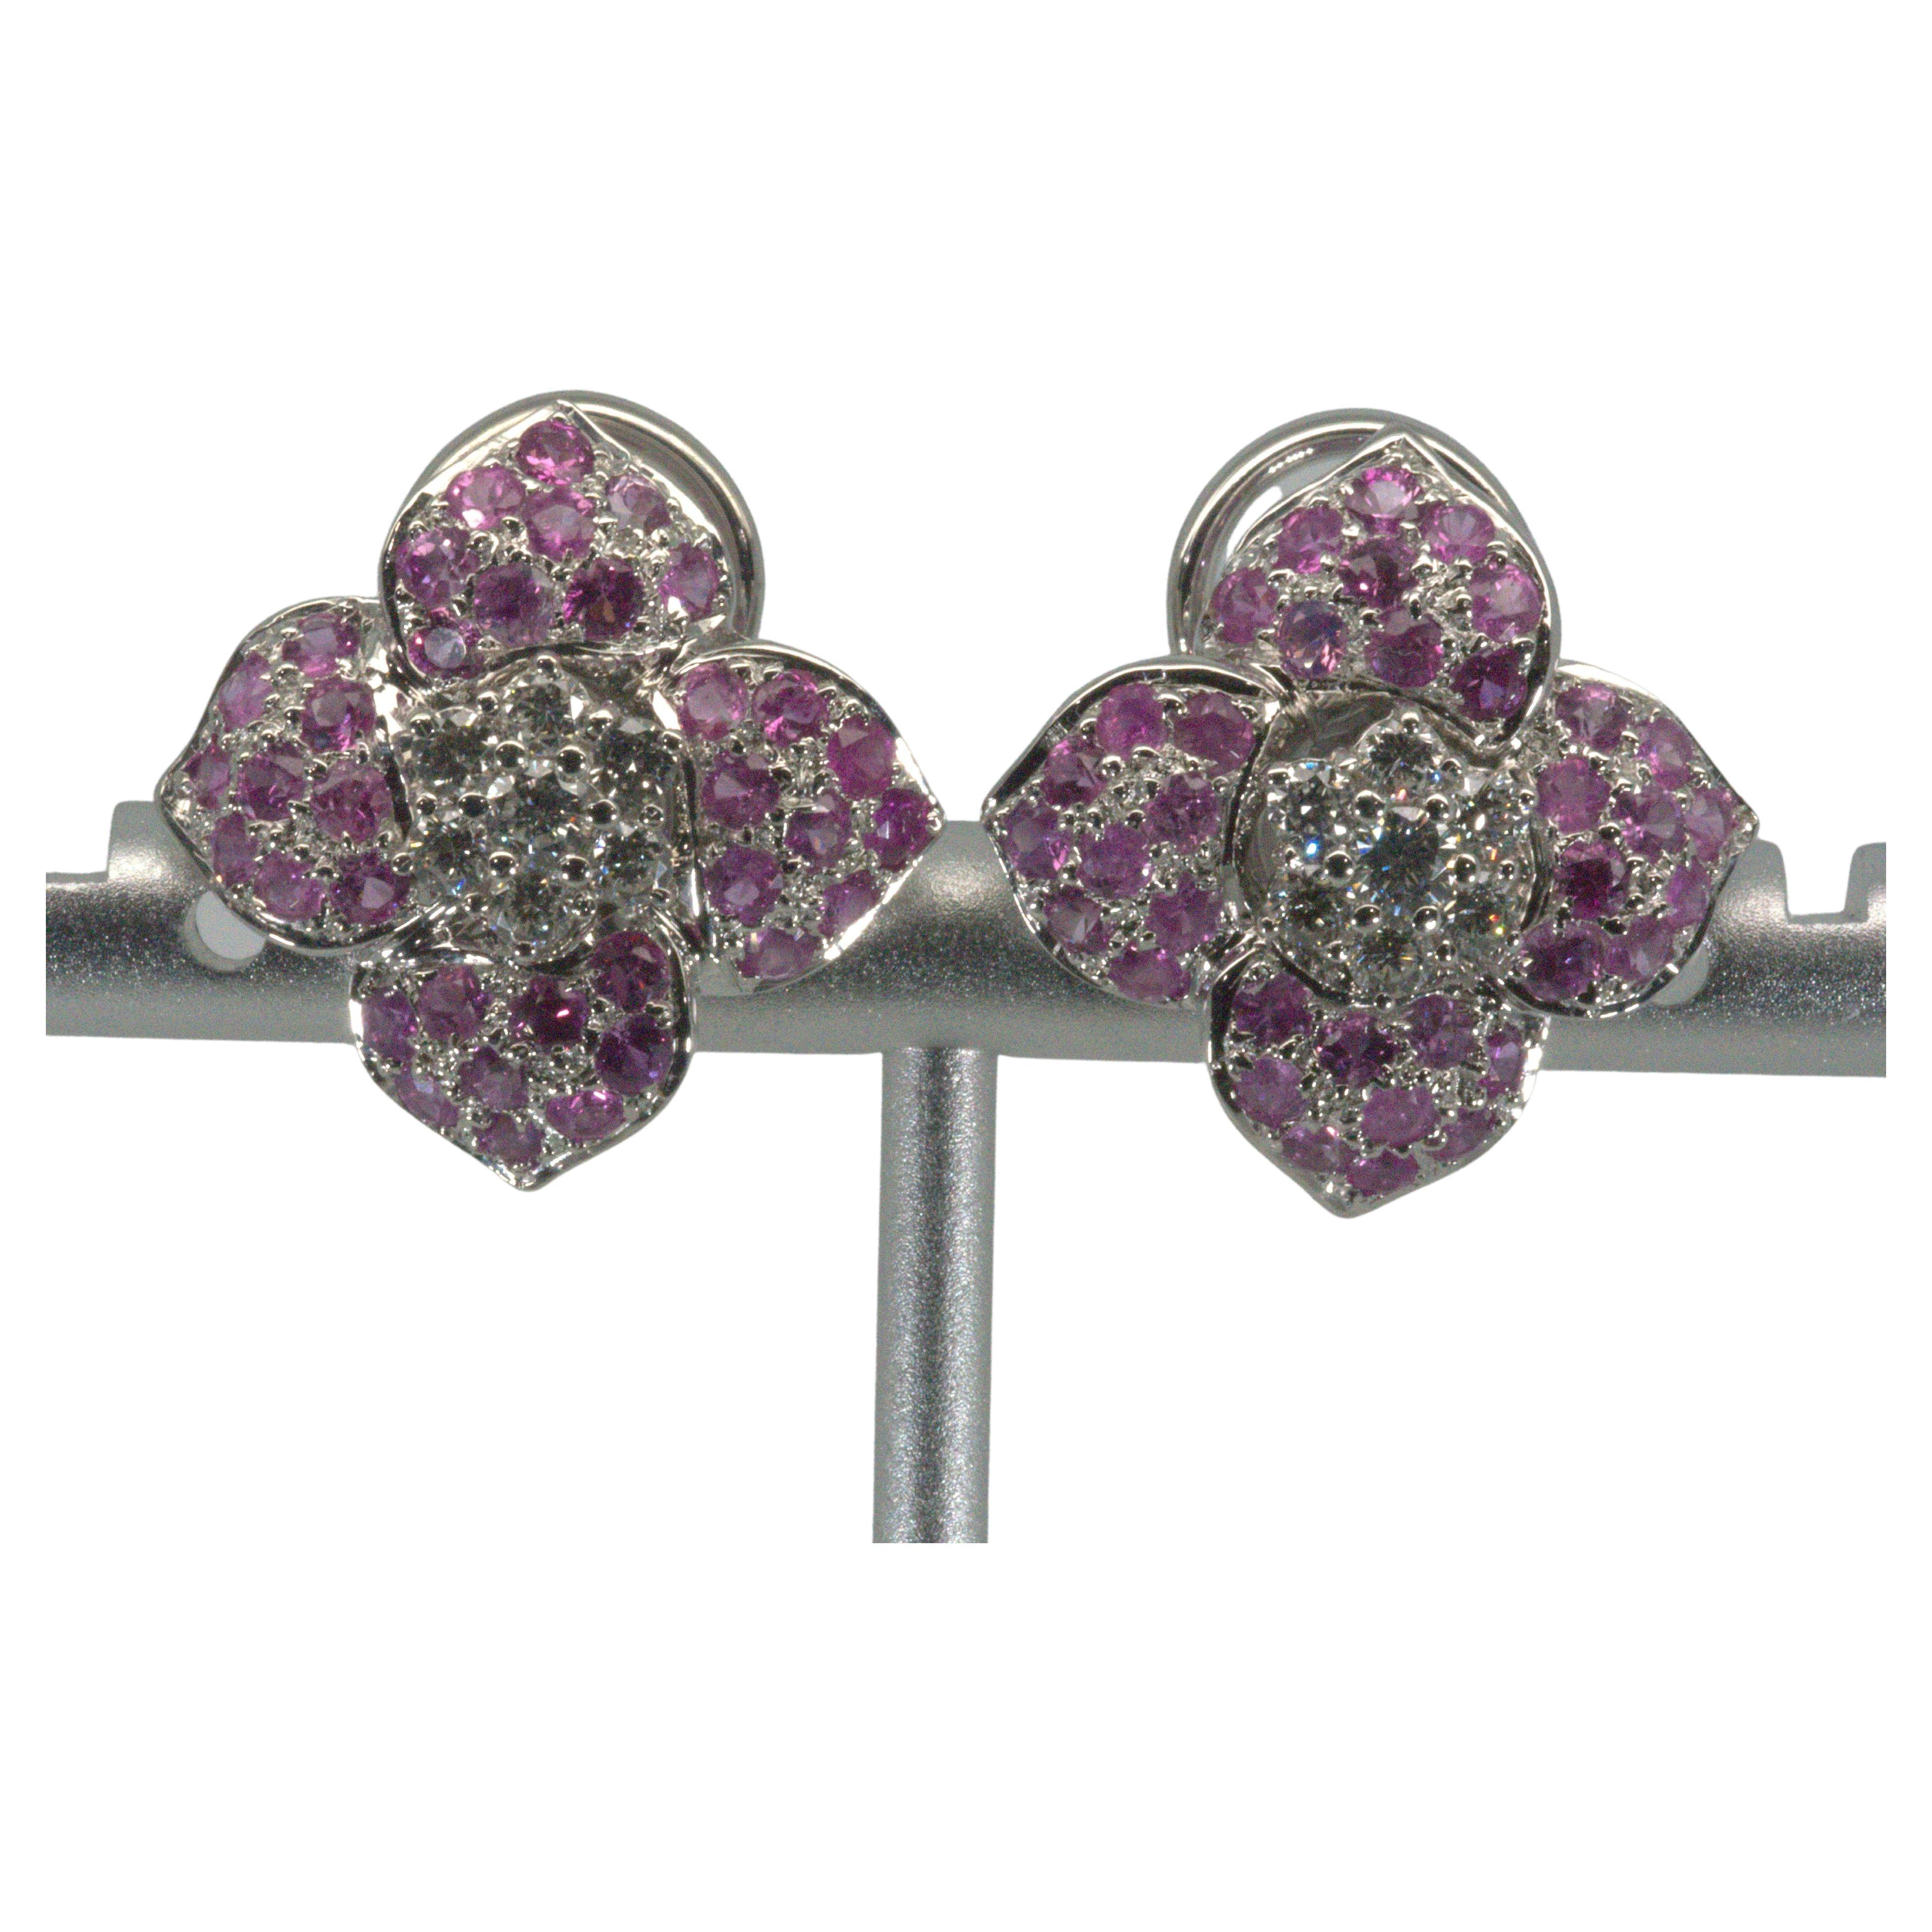 Stunning White Gold Flower Stud Earrings with 2.73 Natural Sapphire and Diamonds